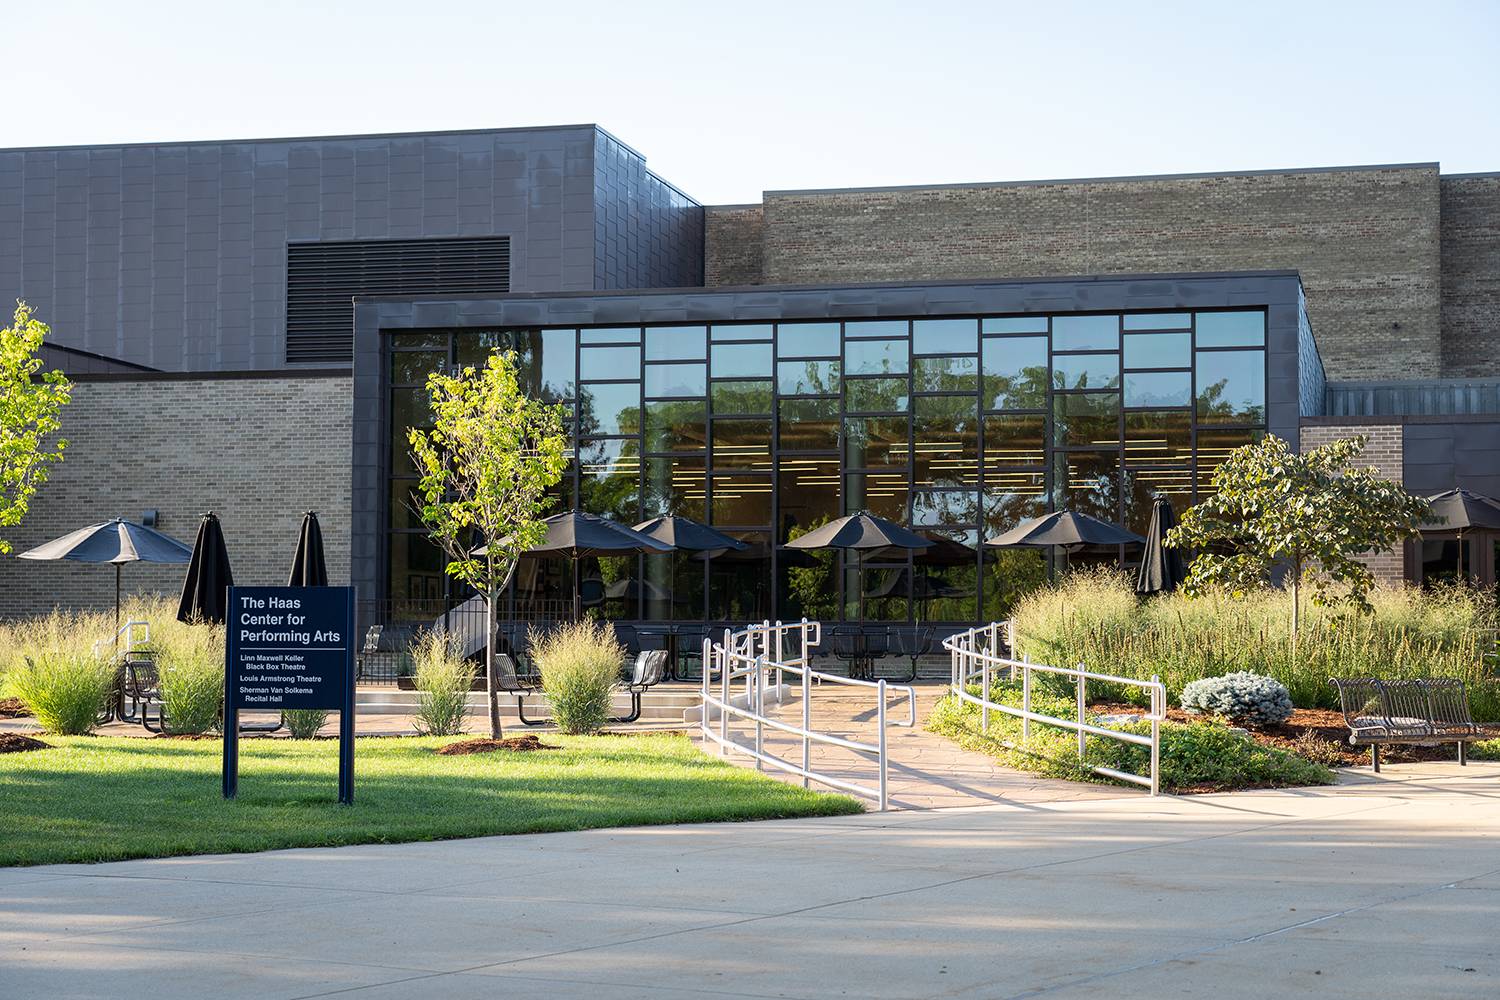 Haas Center for Performing Arts